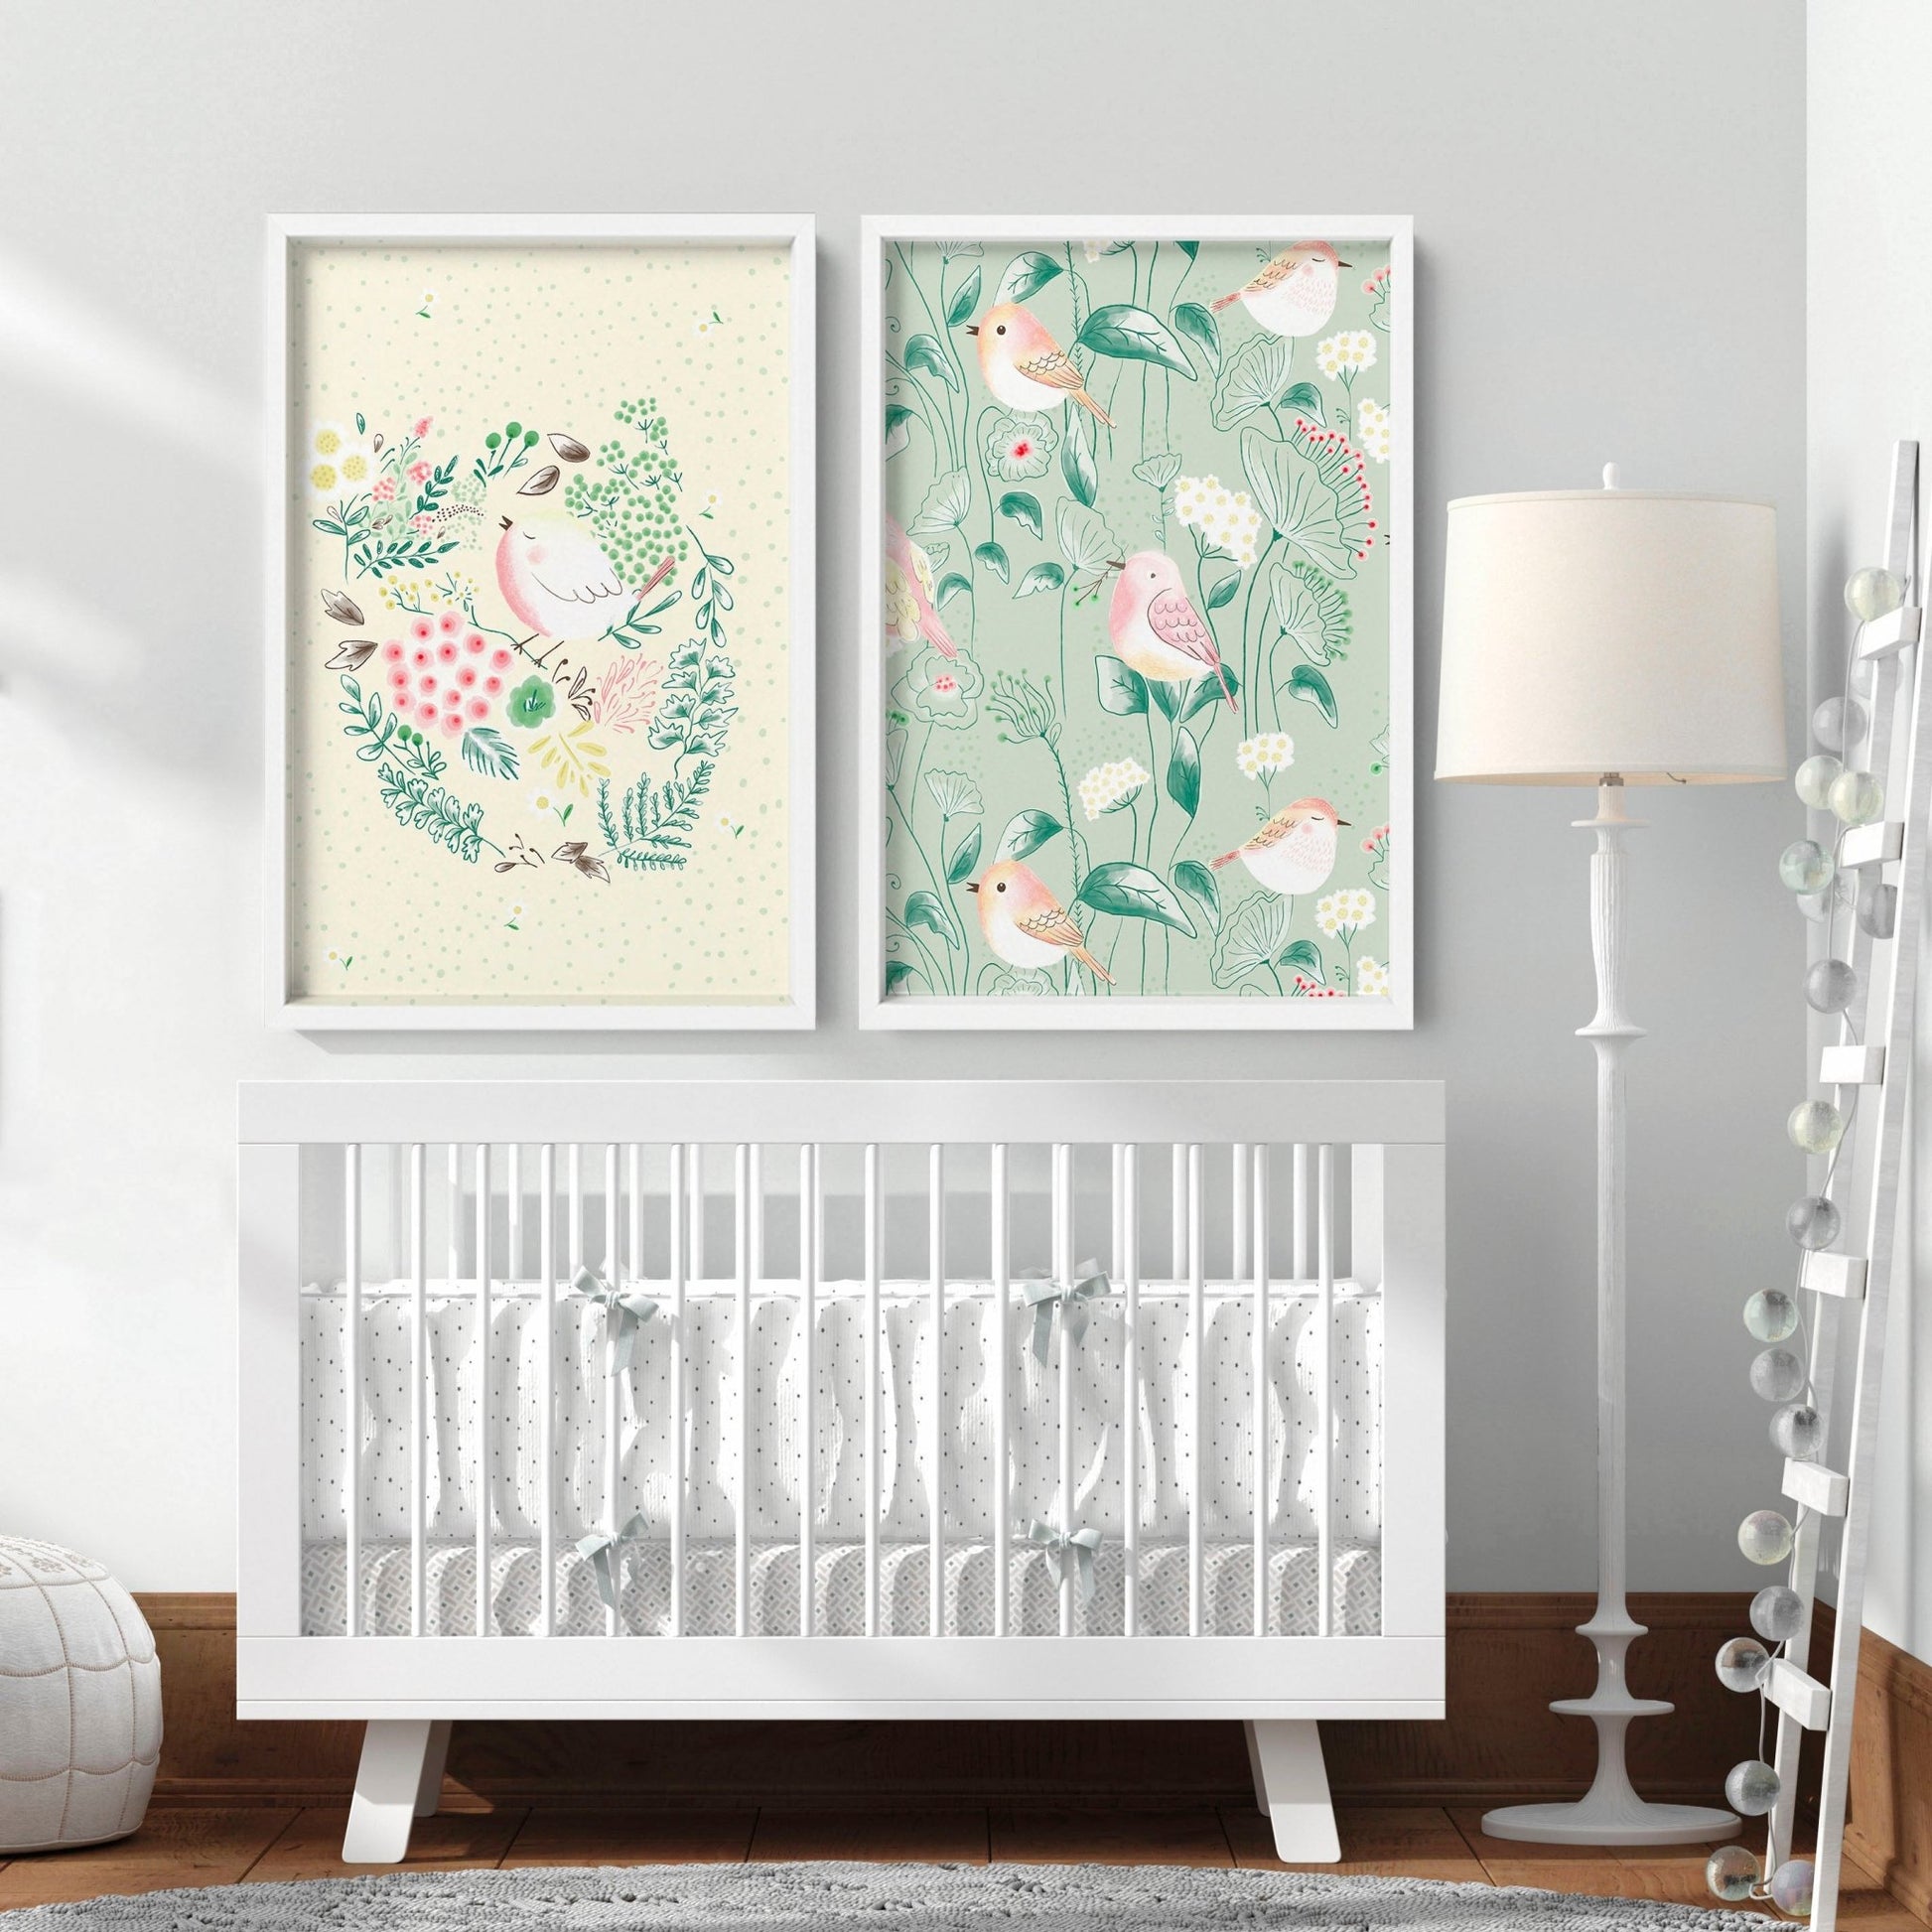 Cute prints for Nursery decor | set of 2 wall art prints - About Wall Art